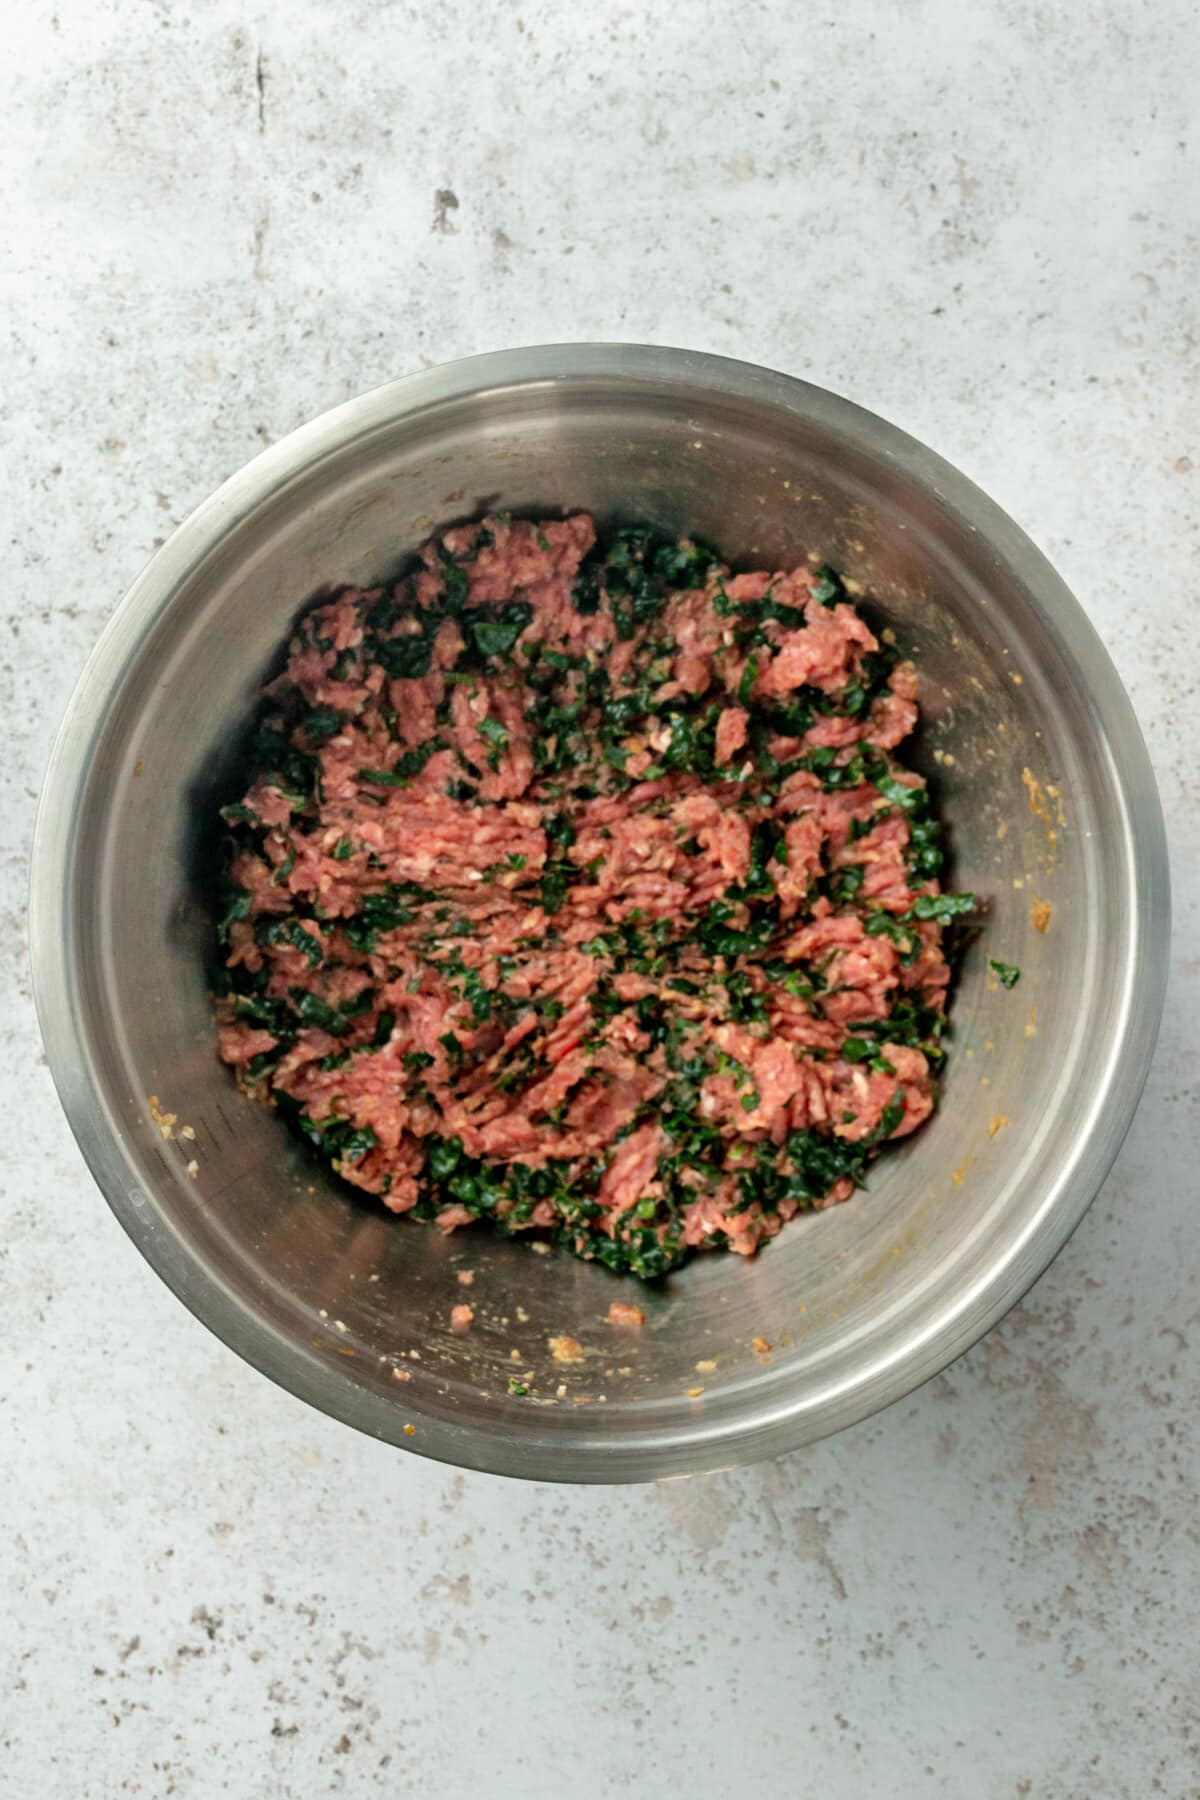 A meatloaf mixture with shredded kale sits in a stainless steel bowl on a light grey colored surface.